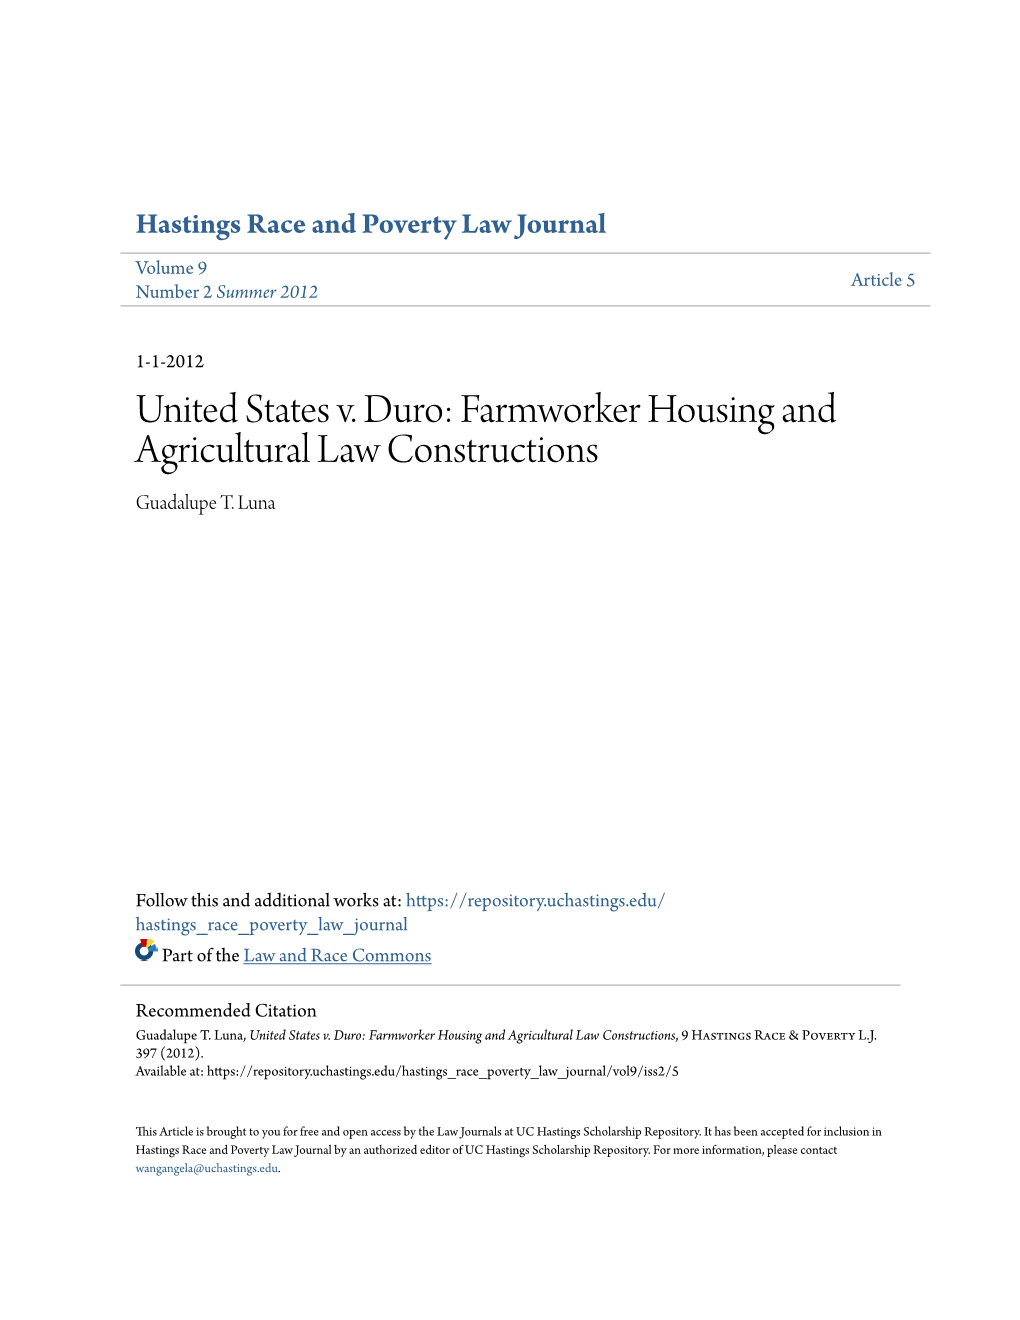 Farmworker Housing and Agricultural Law Constructions Guadalupe T